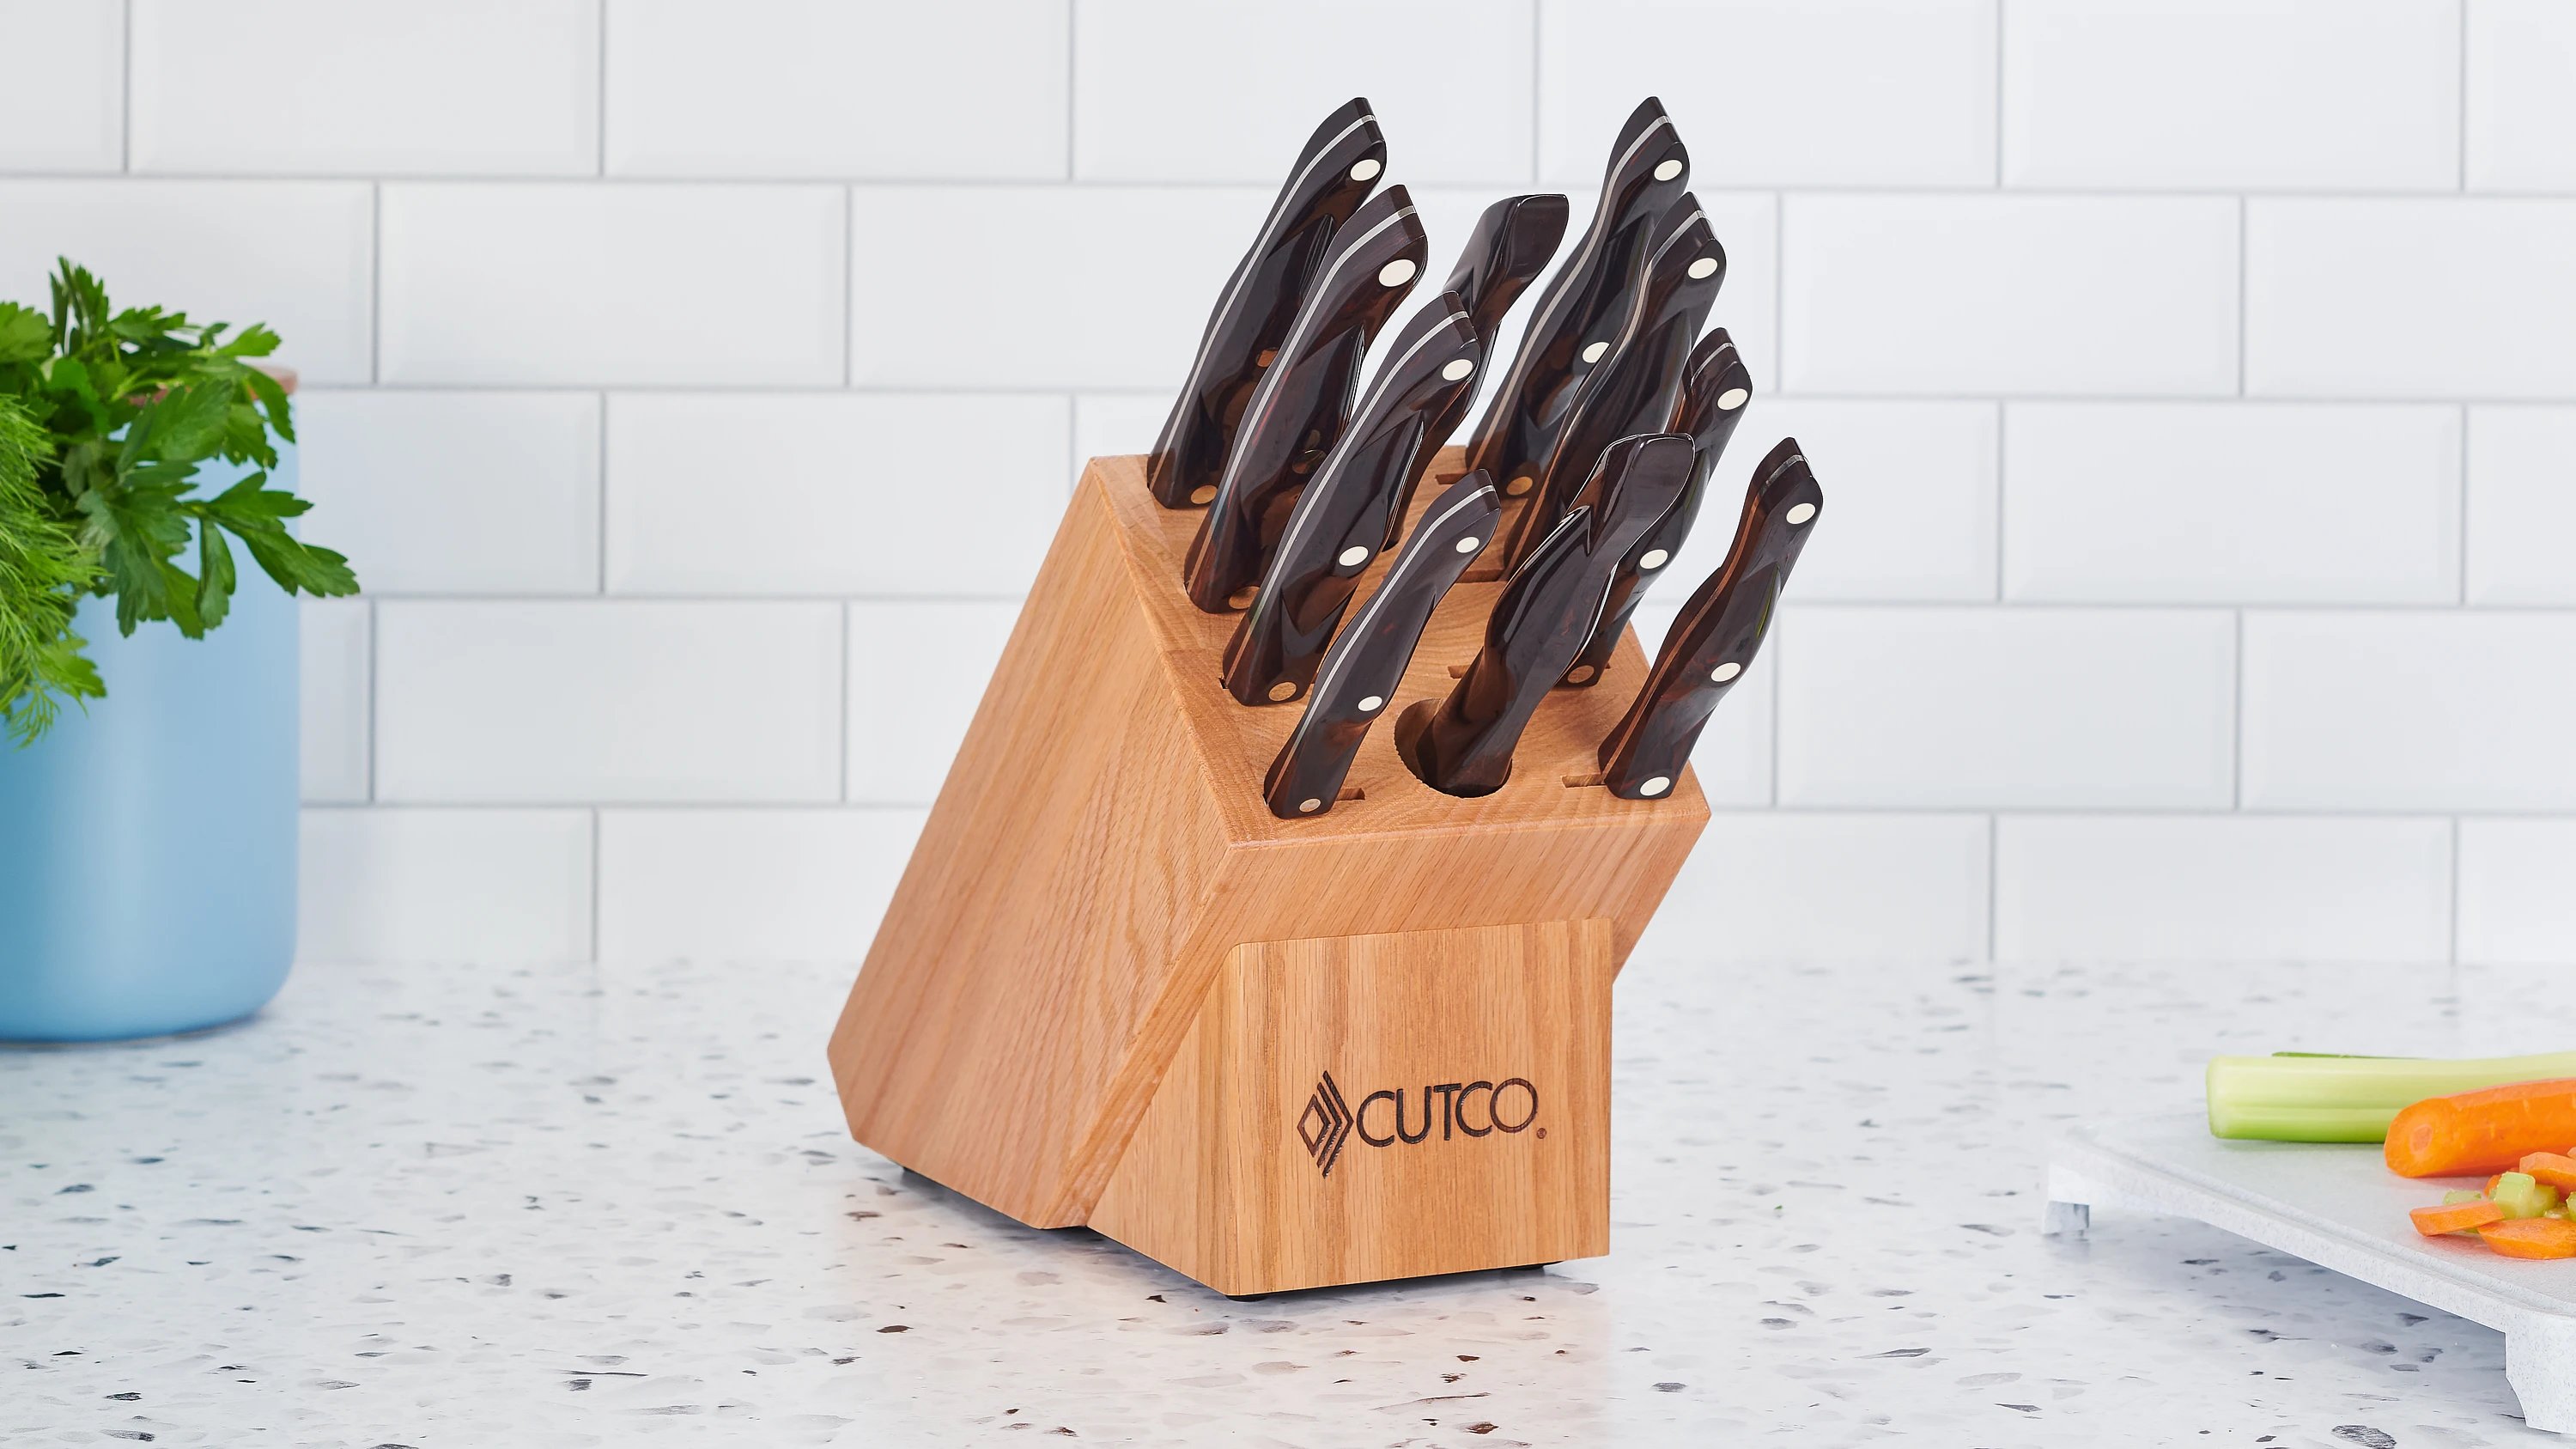 Cutco Knife Set With Block and Fork. Vintage -  Denmark